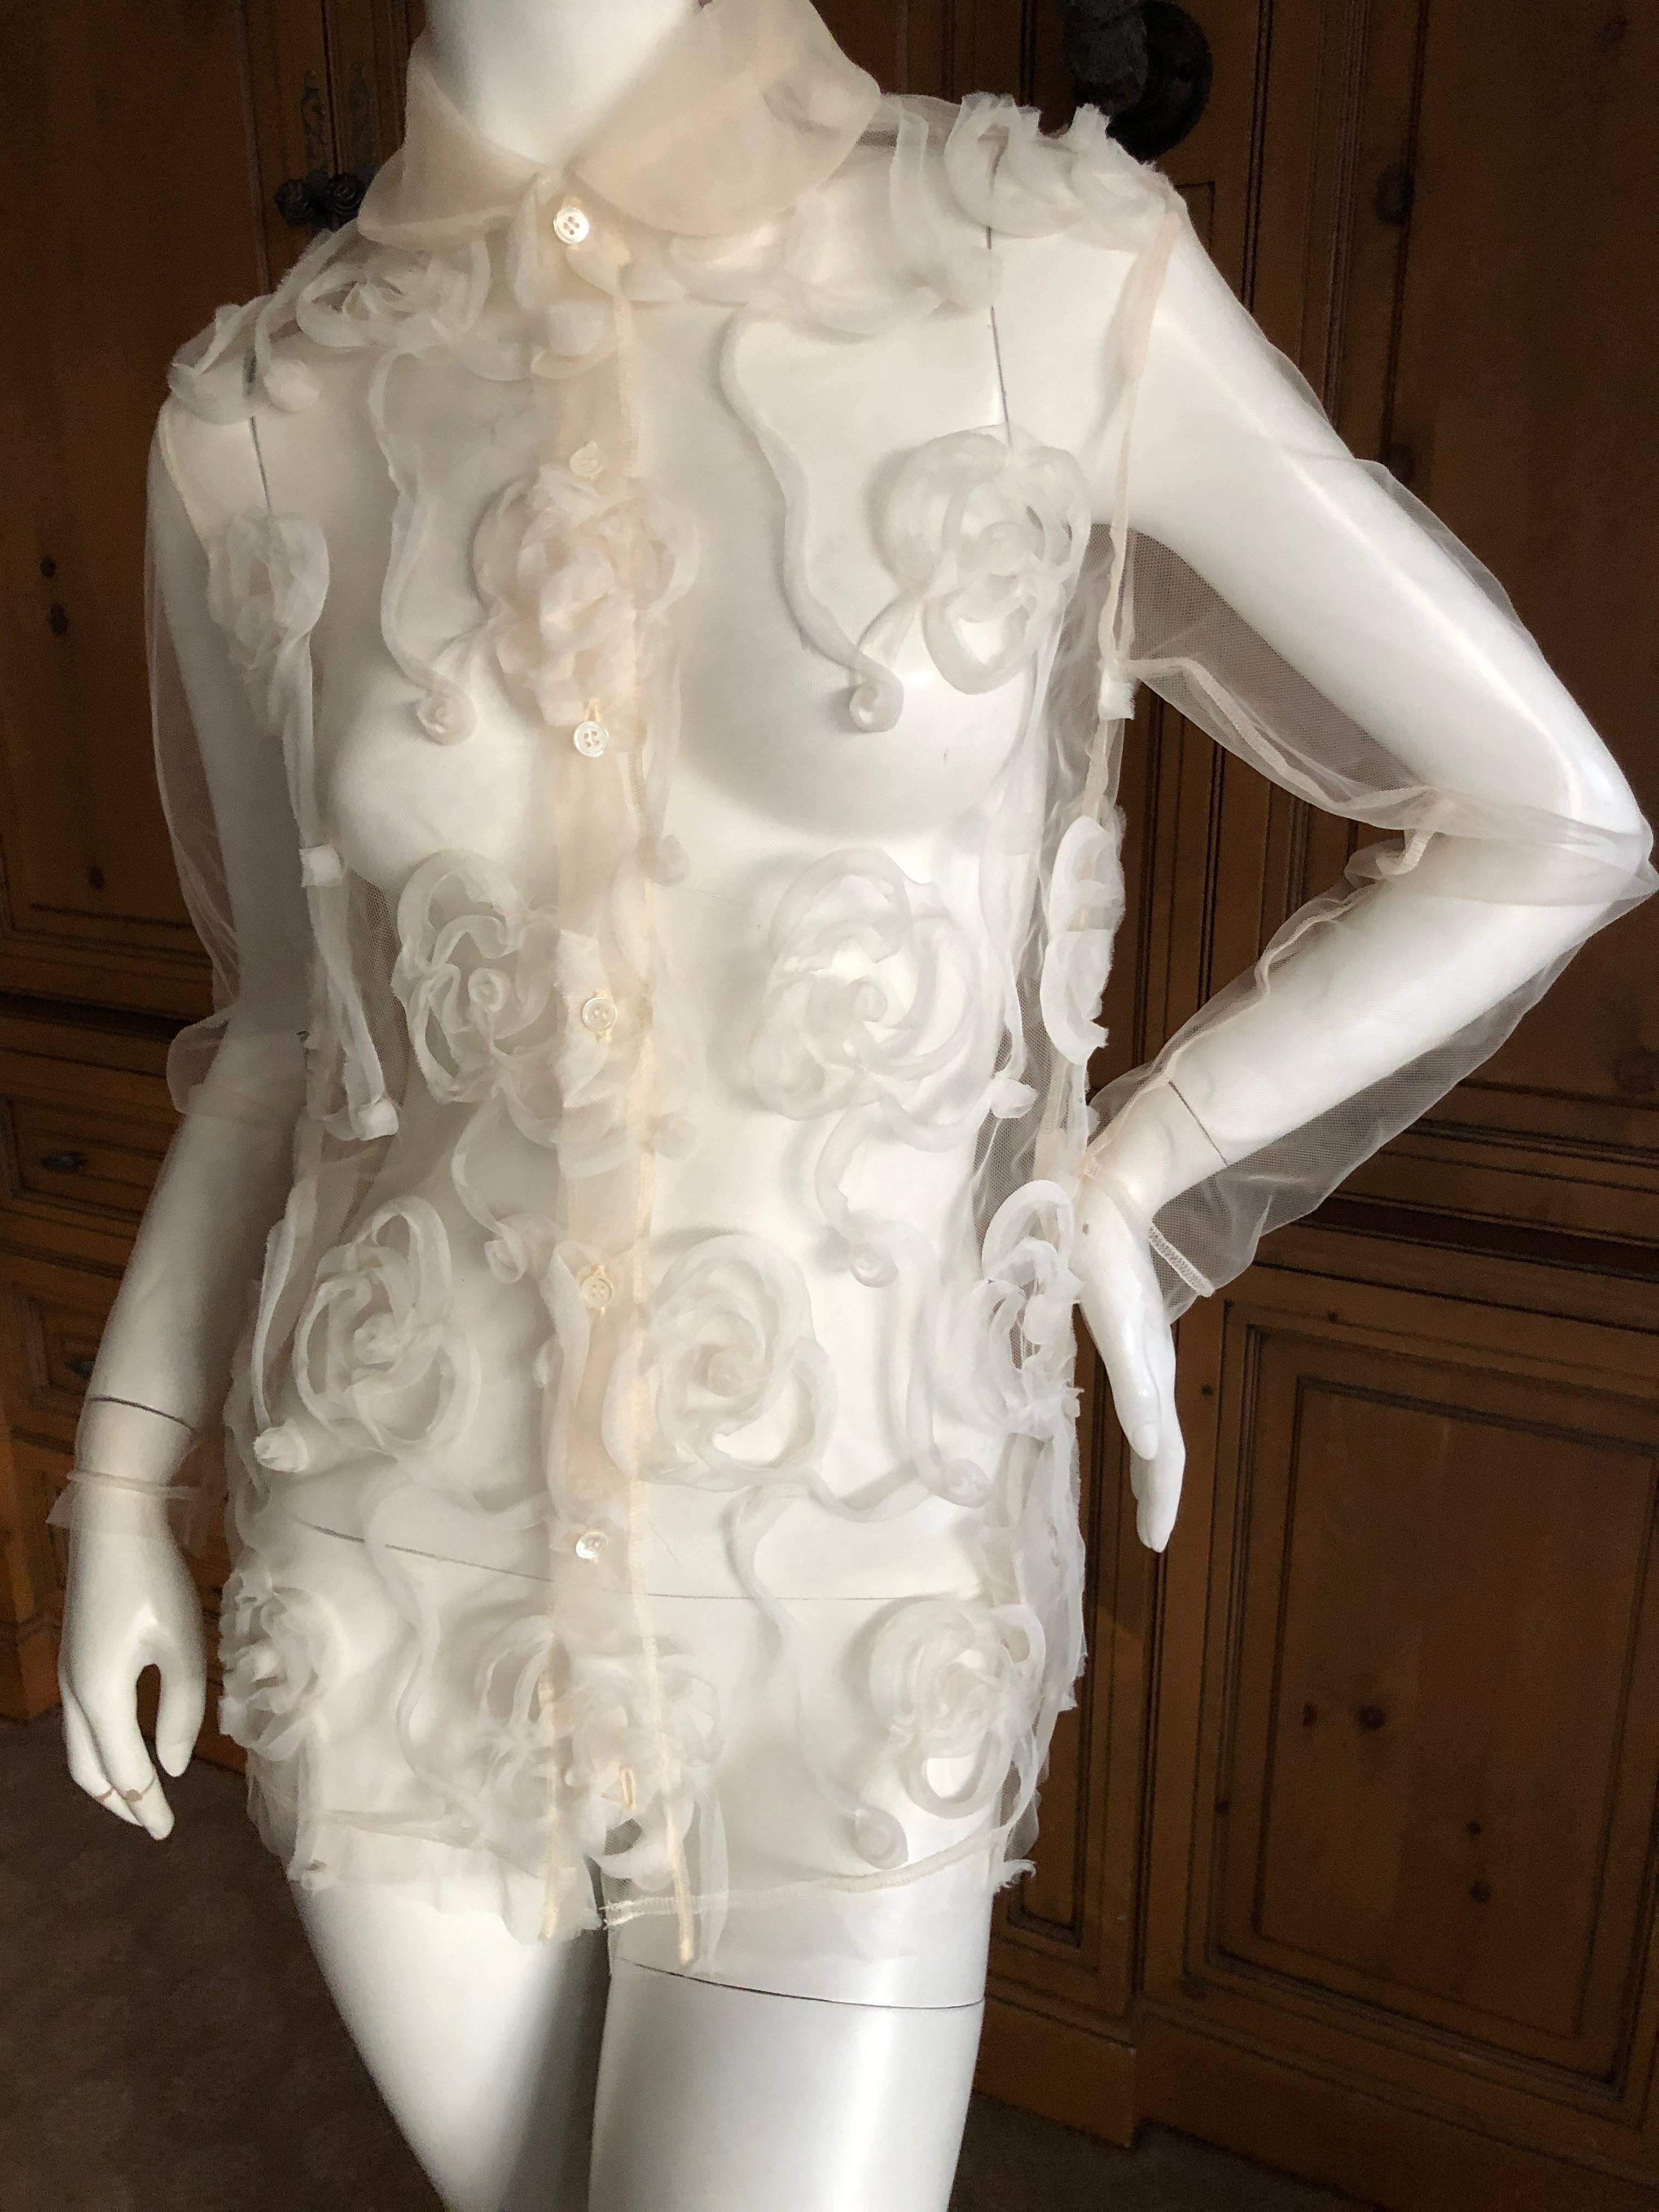 Tricot Comme des Garcons Sheer Blouse with Tulle Overlay Floral Details.
Ivory color, size M
New with tags retail was $475
Bust 40'
Was it 40'
Length 26